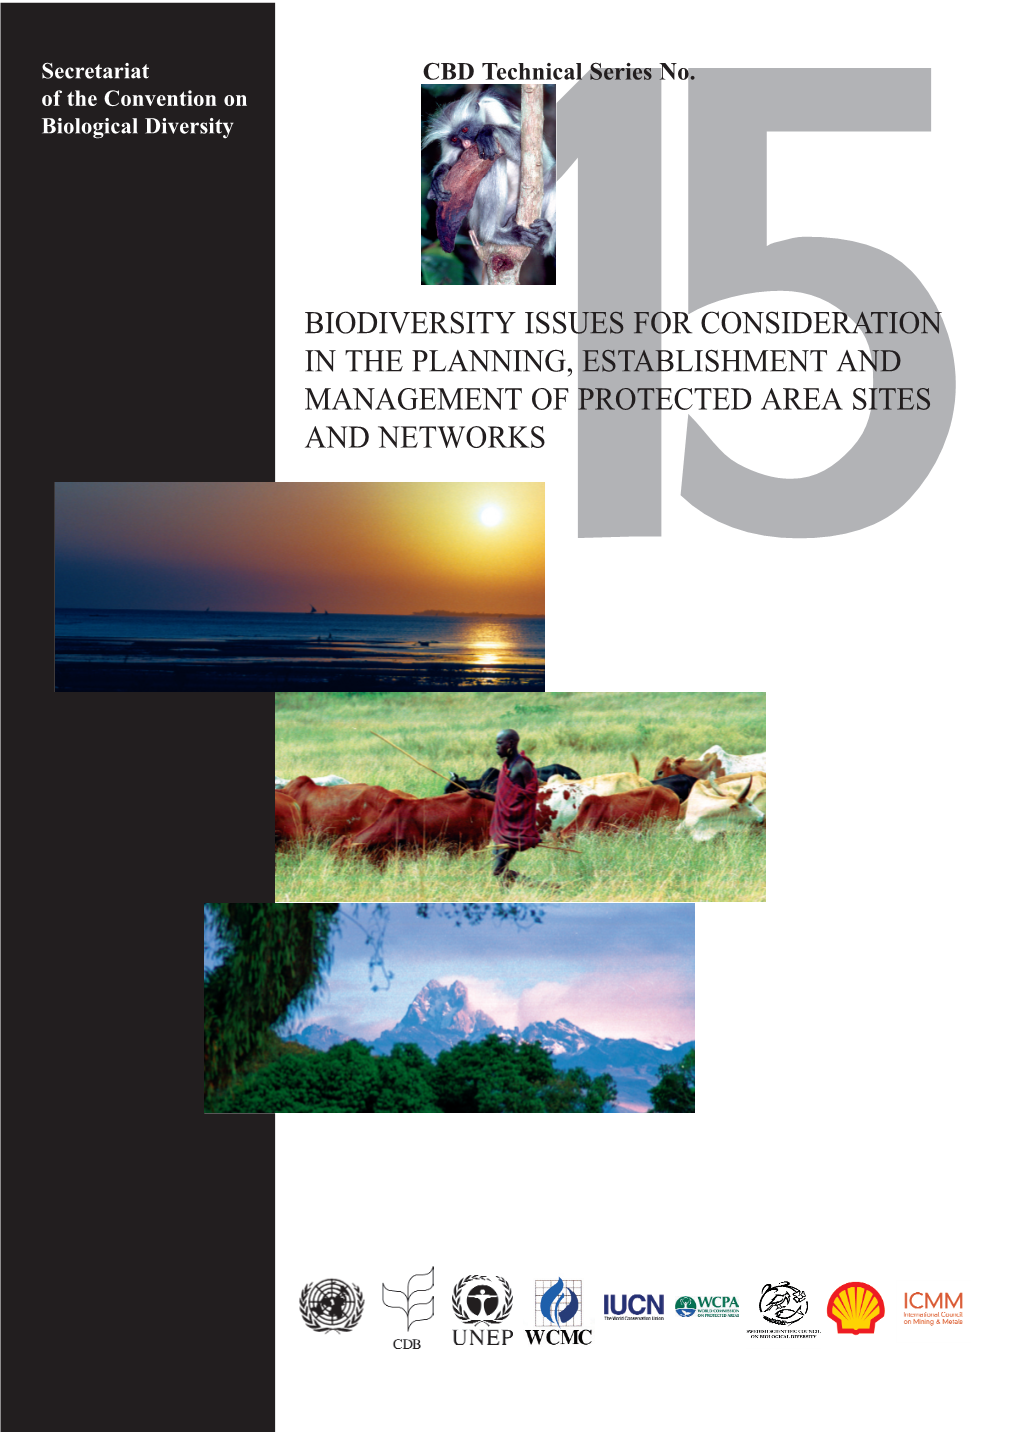 Biodiversity Issues for Consideration in the Planning, Establishment and Management of Protected Area Sites and Networks Secretariat CBD Technical Series No